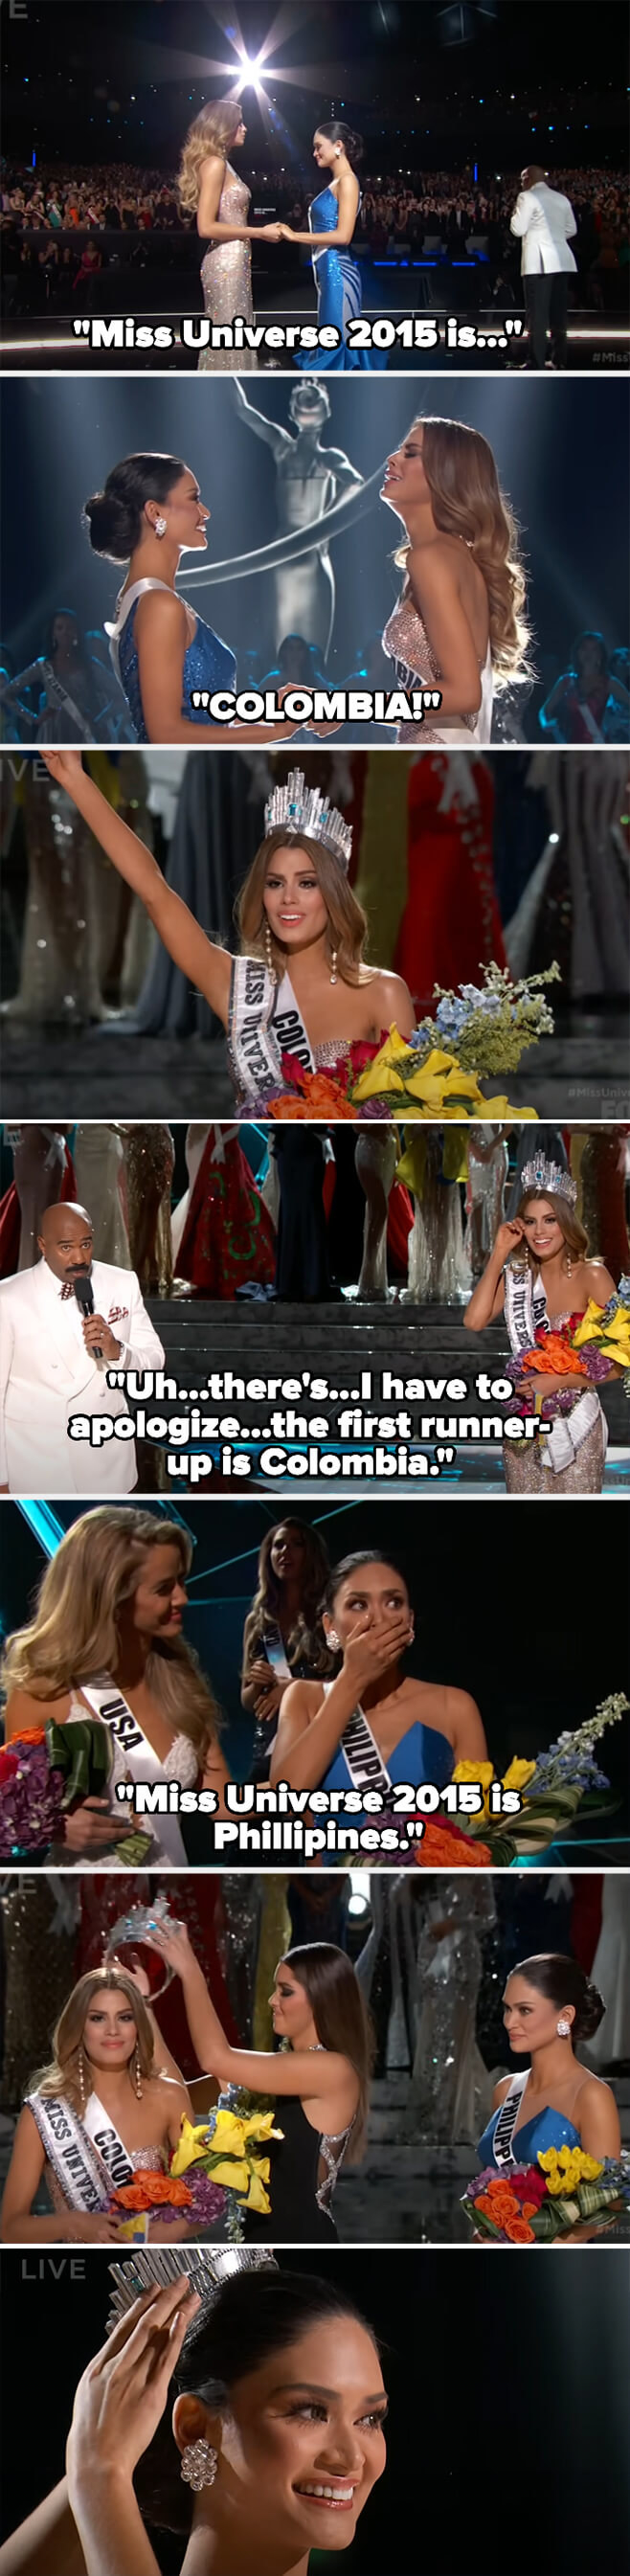 harvey announcing colombia as the winner and then apologizing and announcing miss universe is philipines